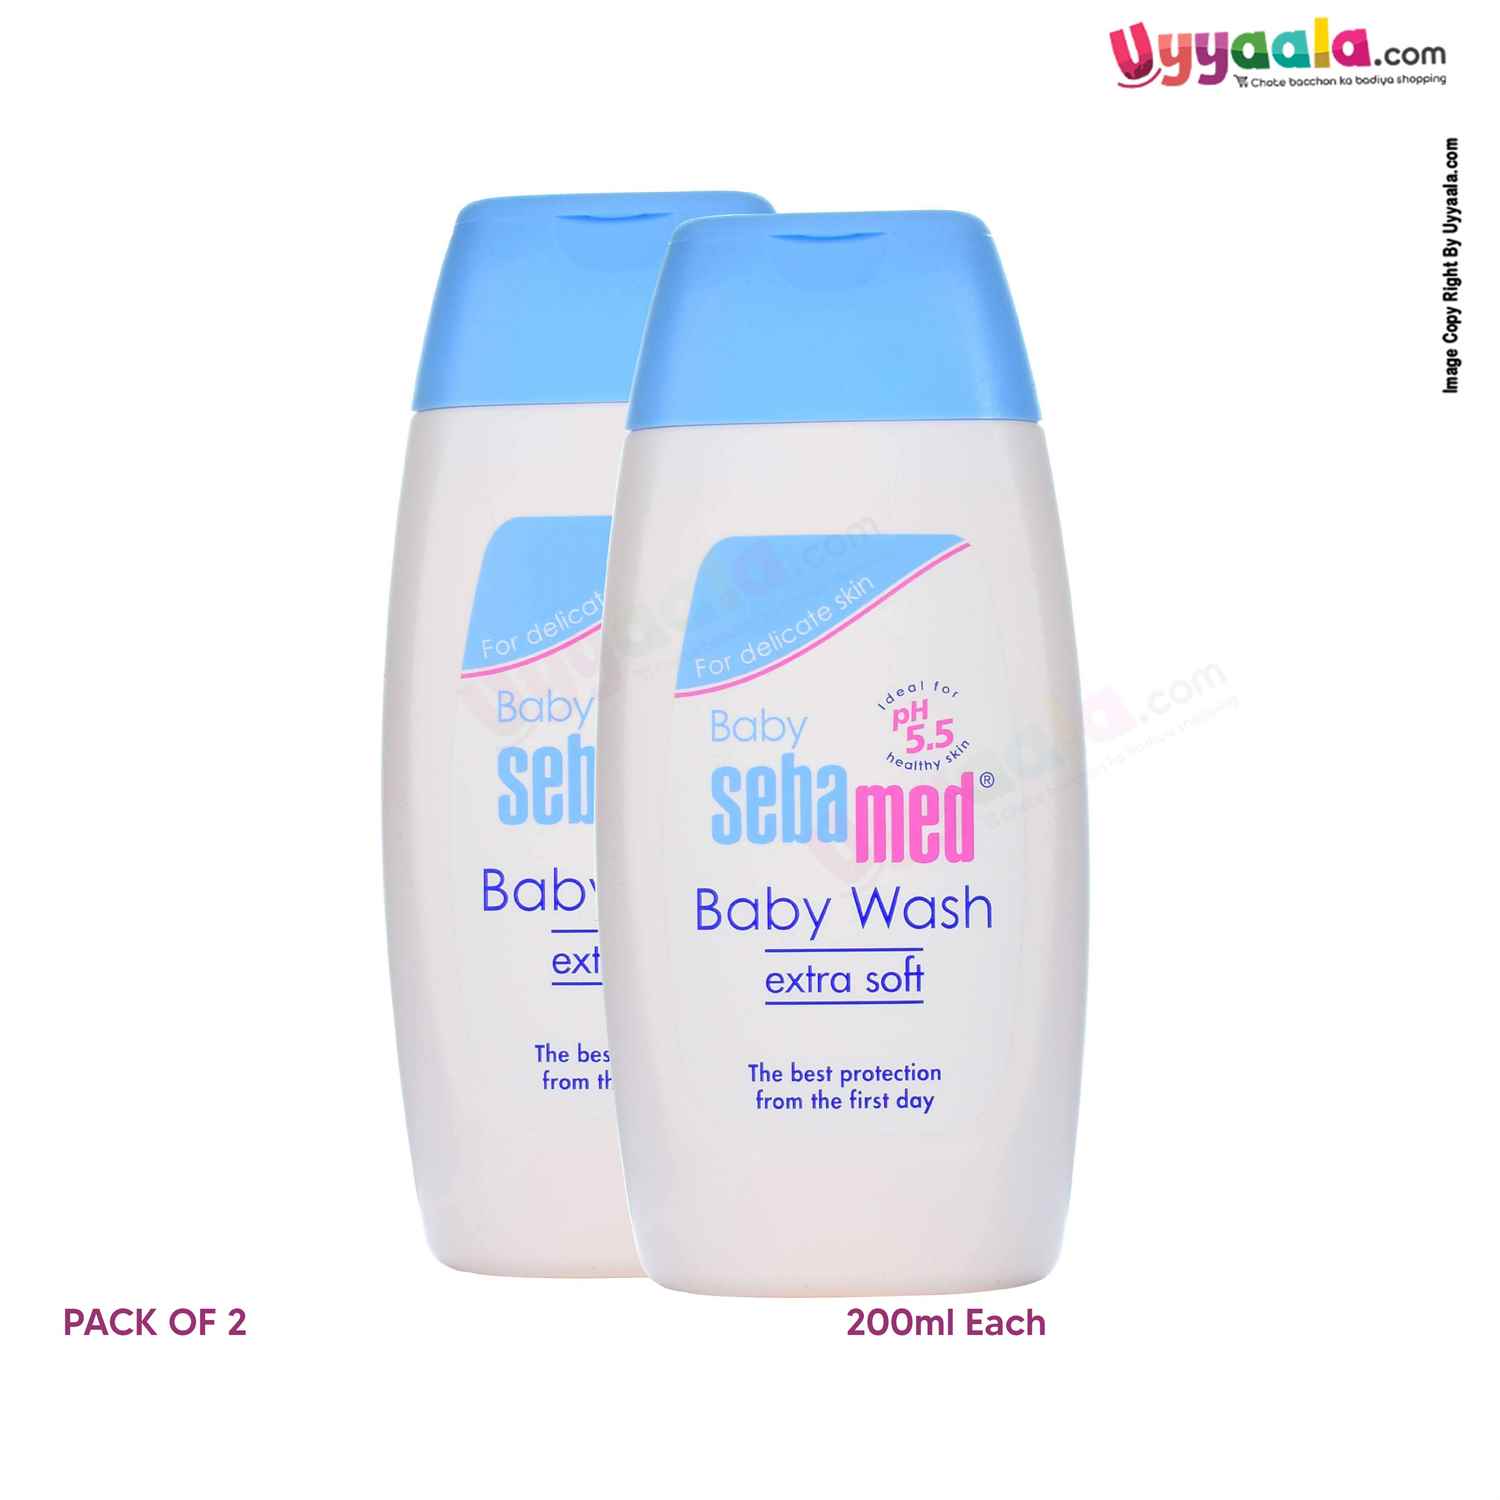 Sebamed Baby Wash Extra Soft, Pack of 2 (200 ml Each)